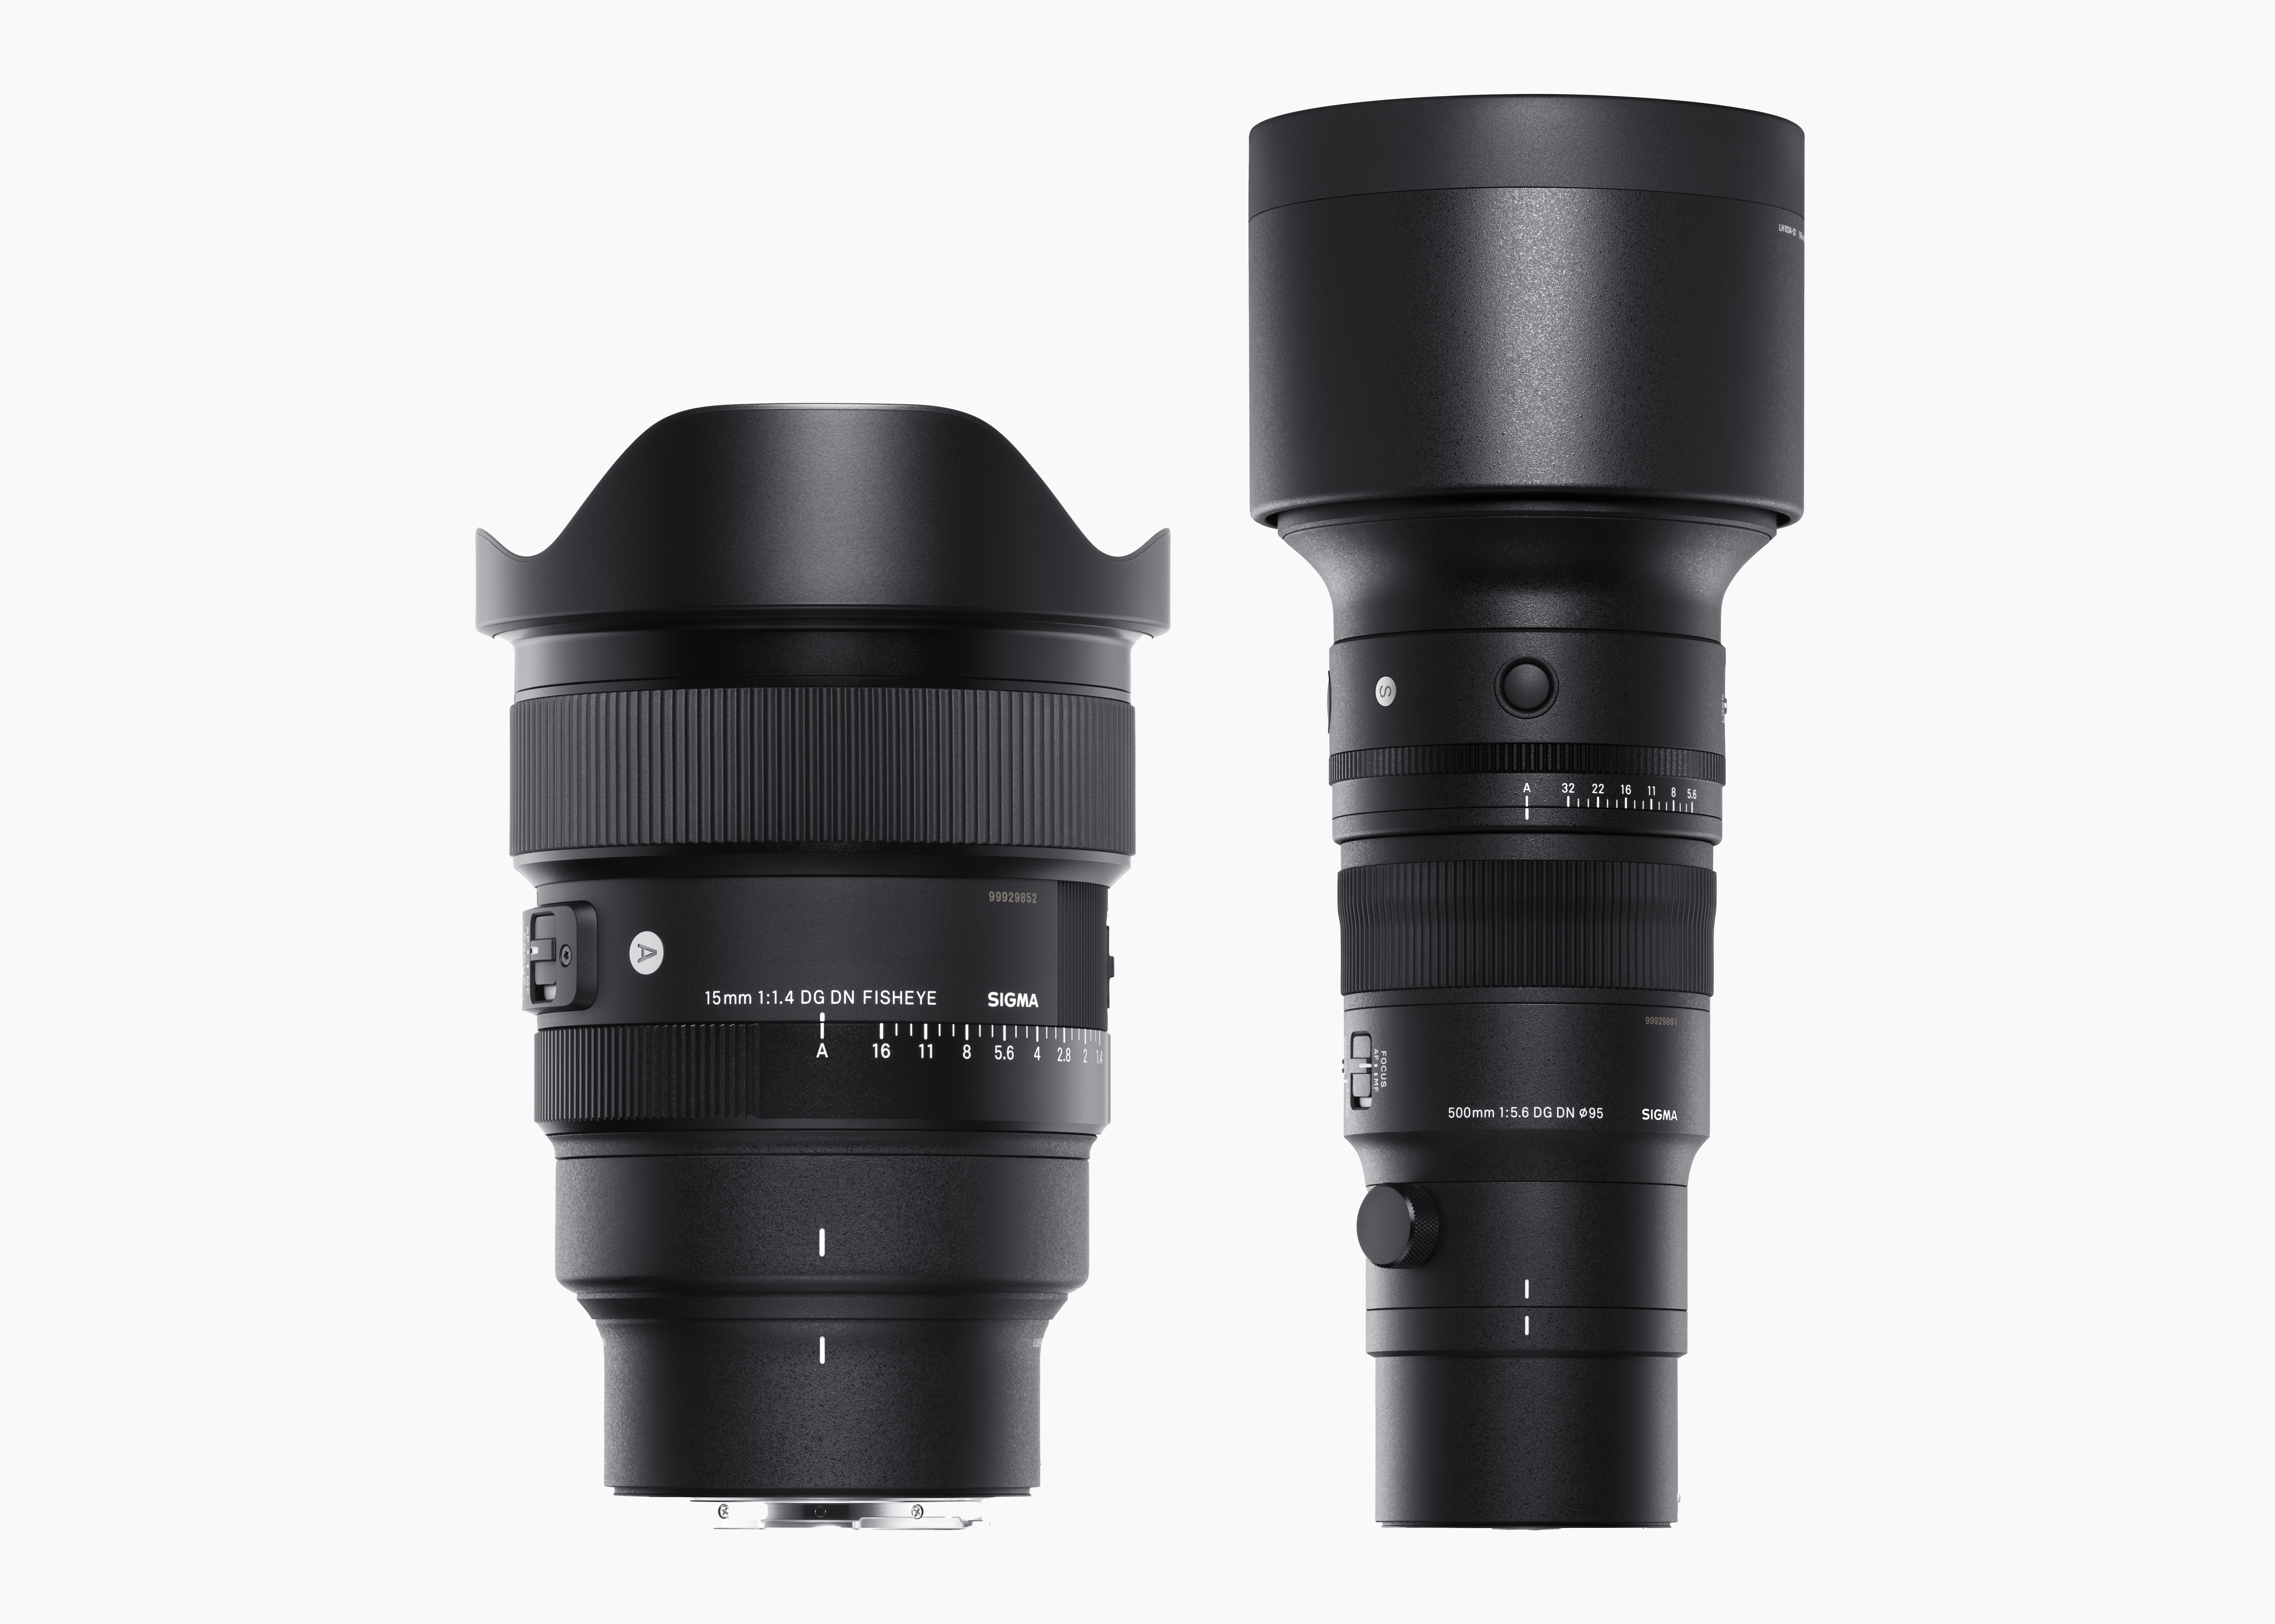 NEW SIGMA 15mm F1.4 DG DN and SIGMA 500mm F5.6 9